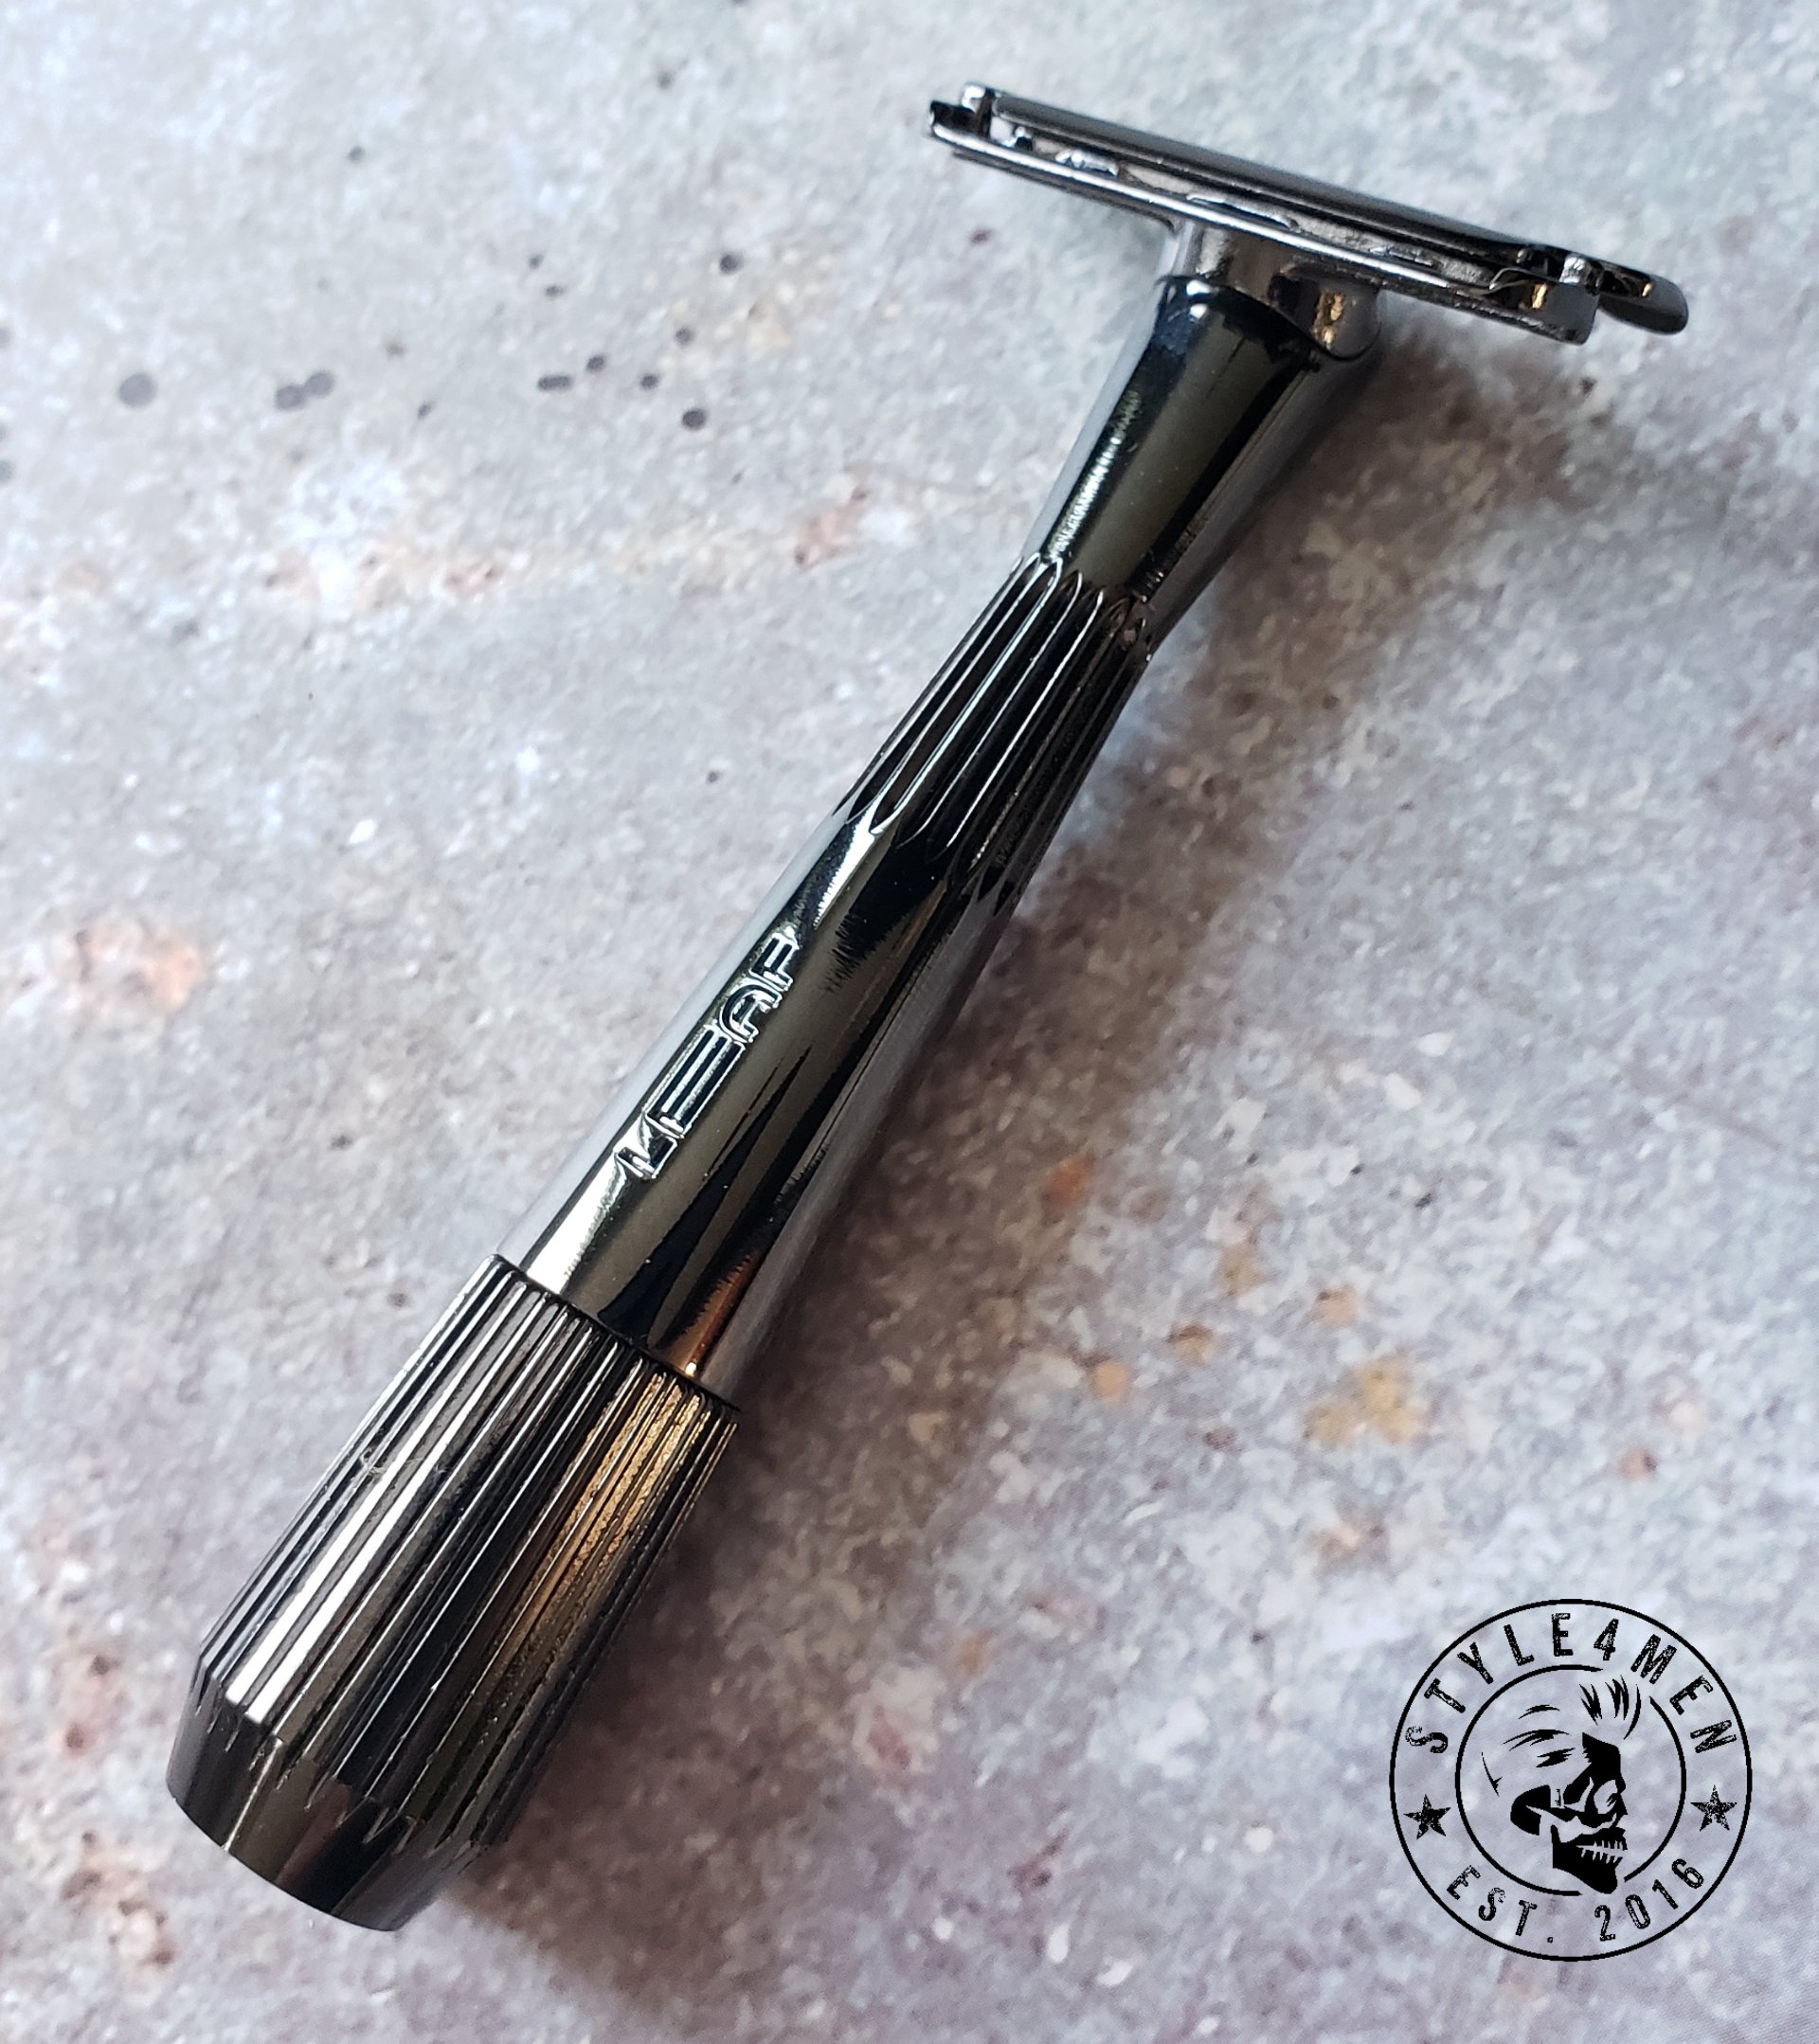 Leaf Shave is back with the TWIG – a single blade safety razor